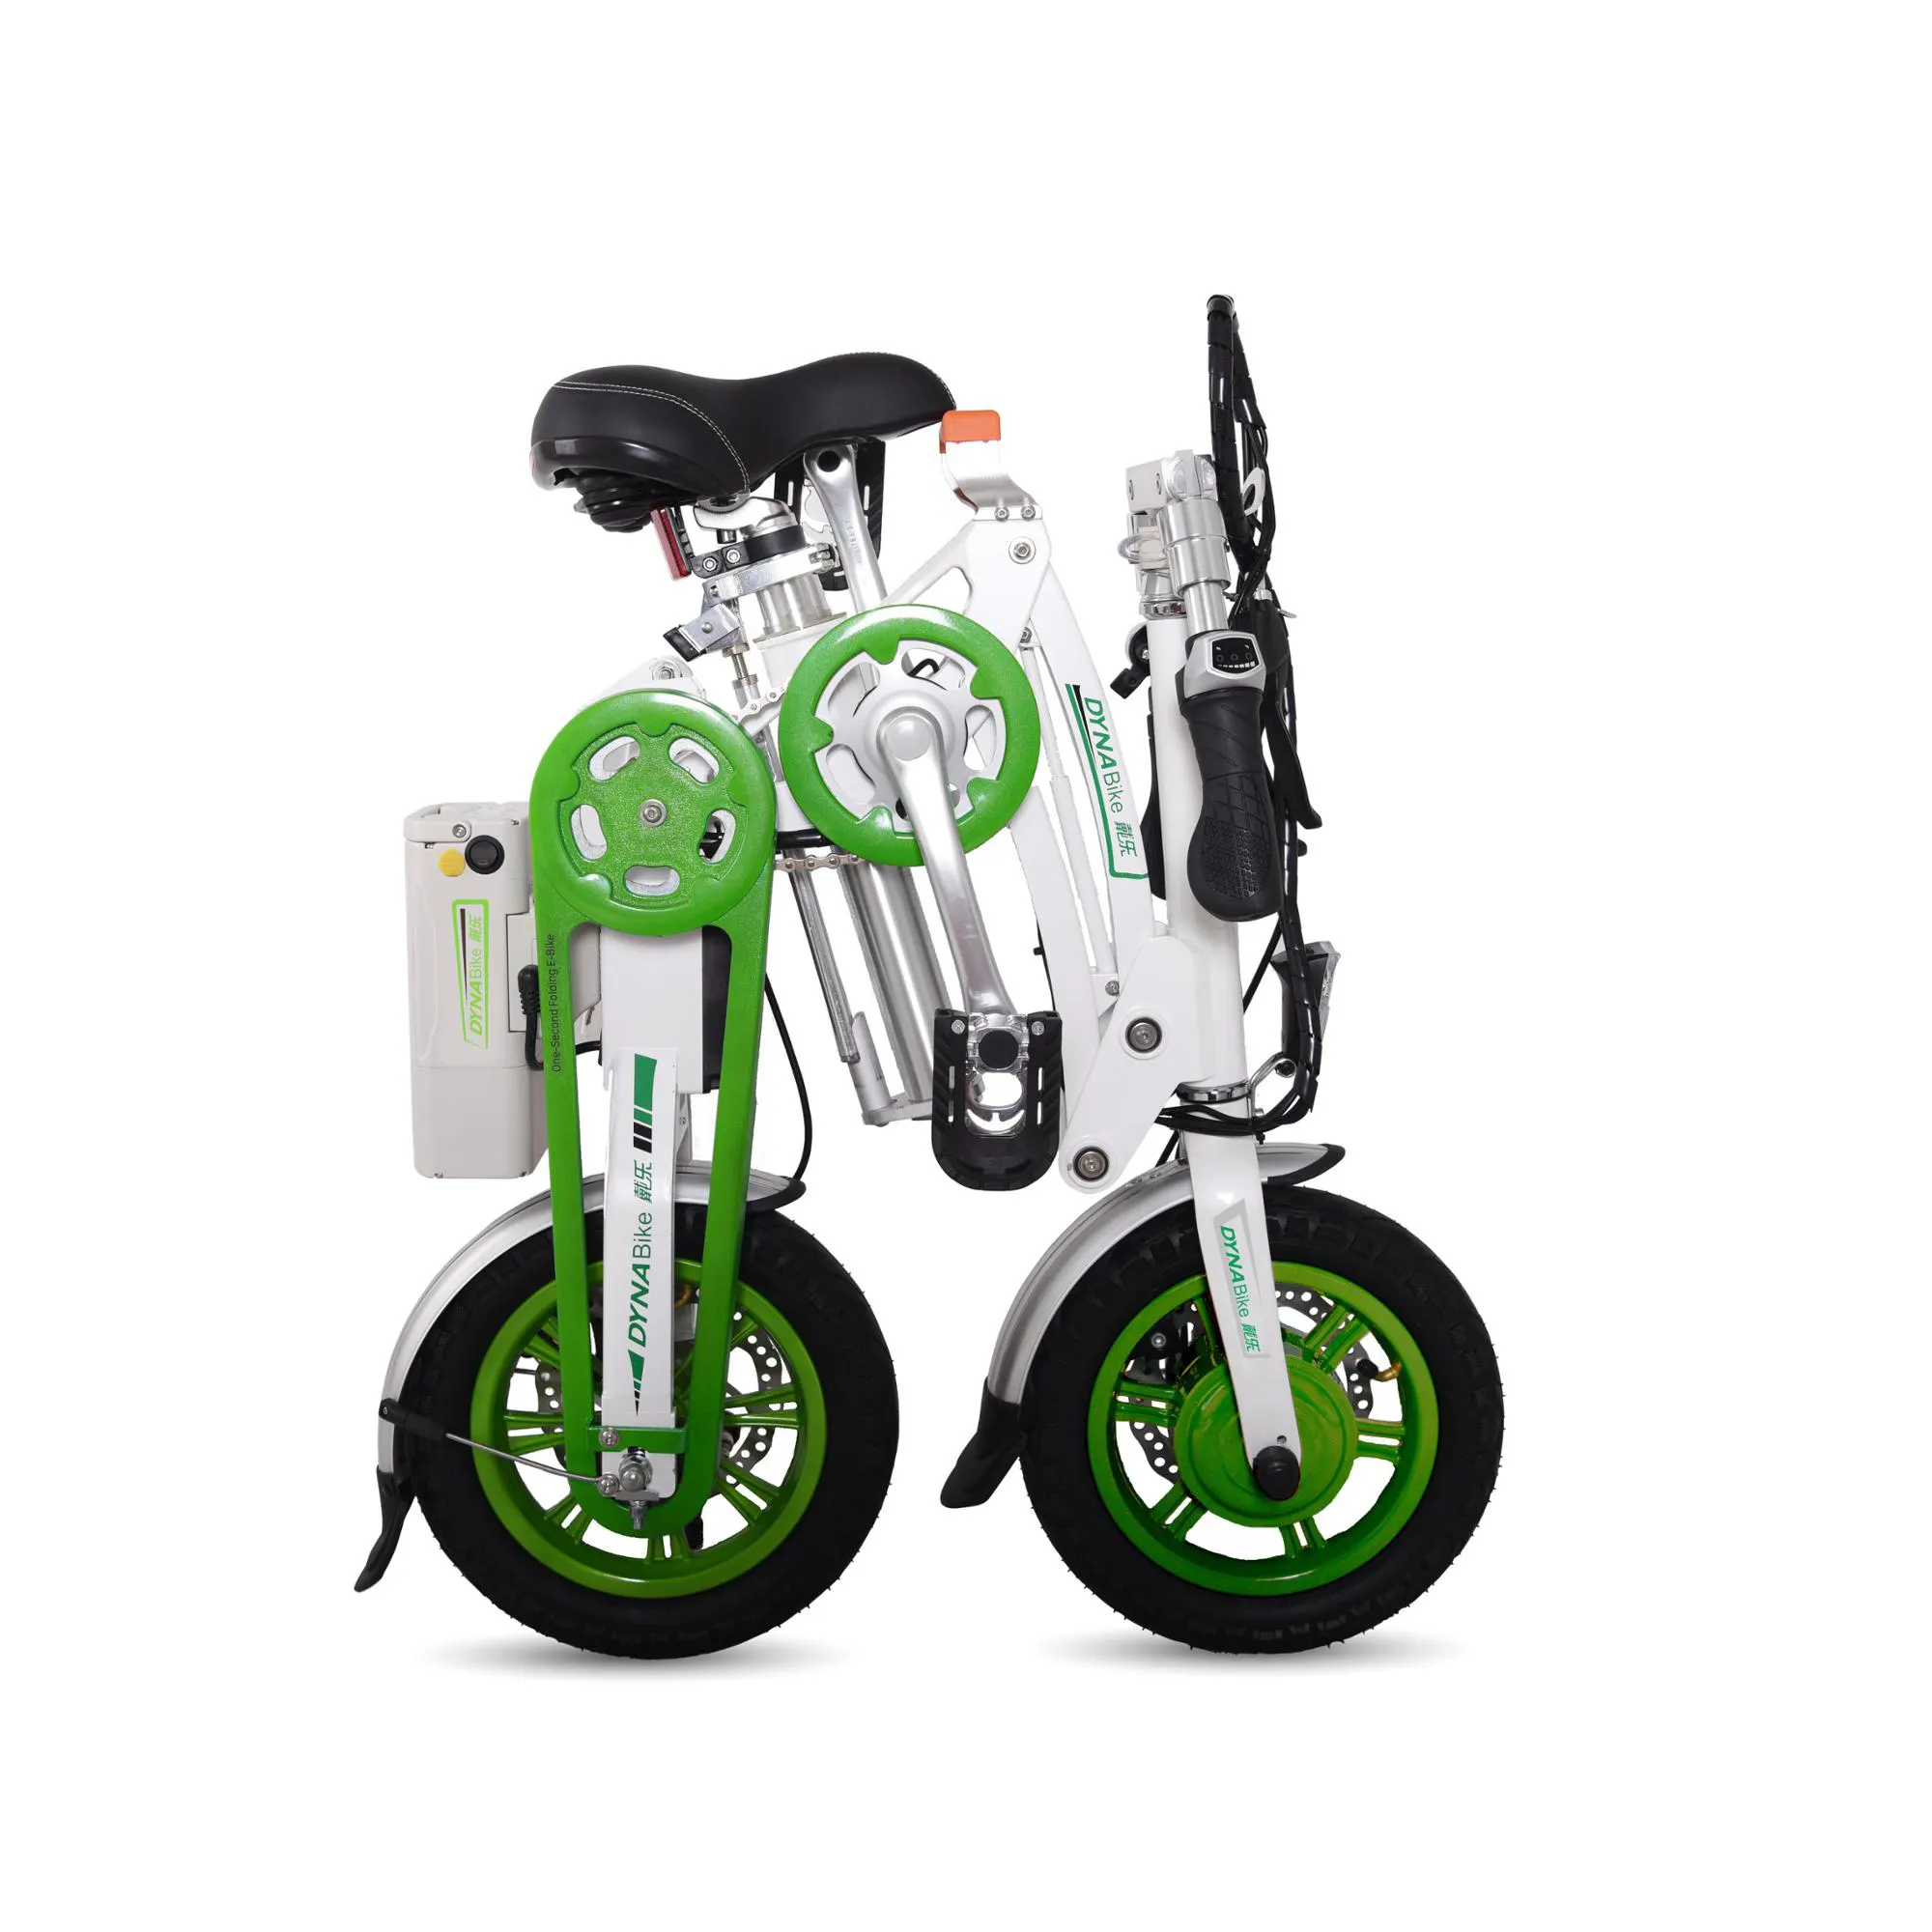 Wholesale Foldable E-bike for Sale /Good Electric Folding Fat Bike/High Quality Electric Bicycle from China